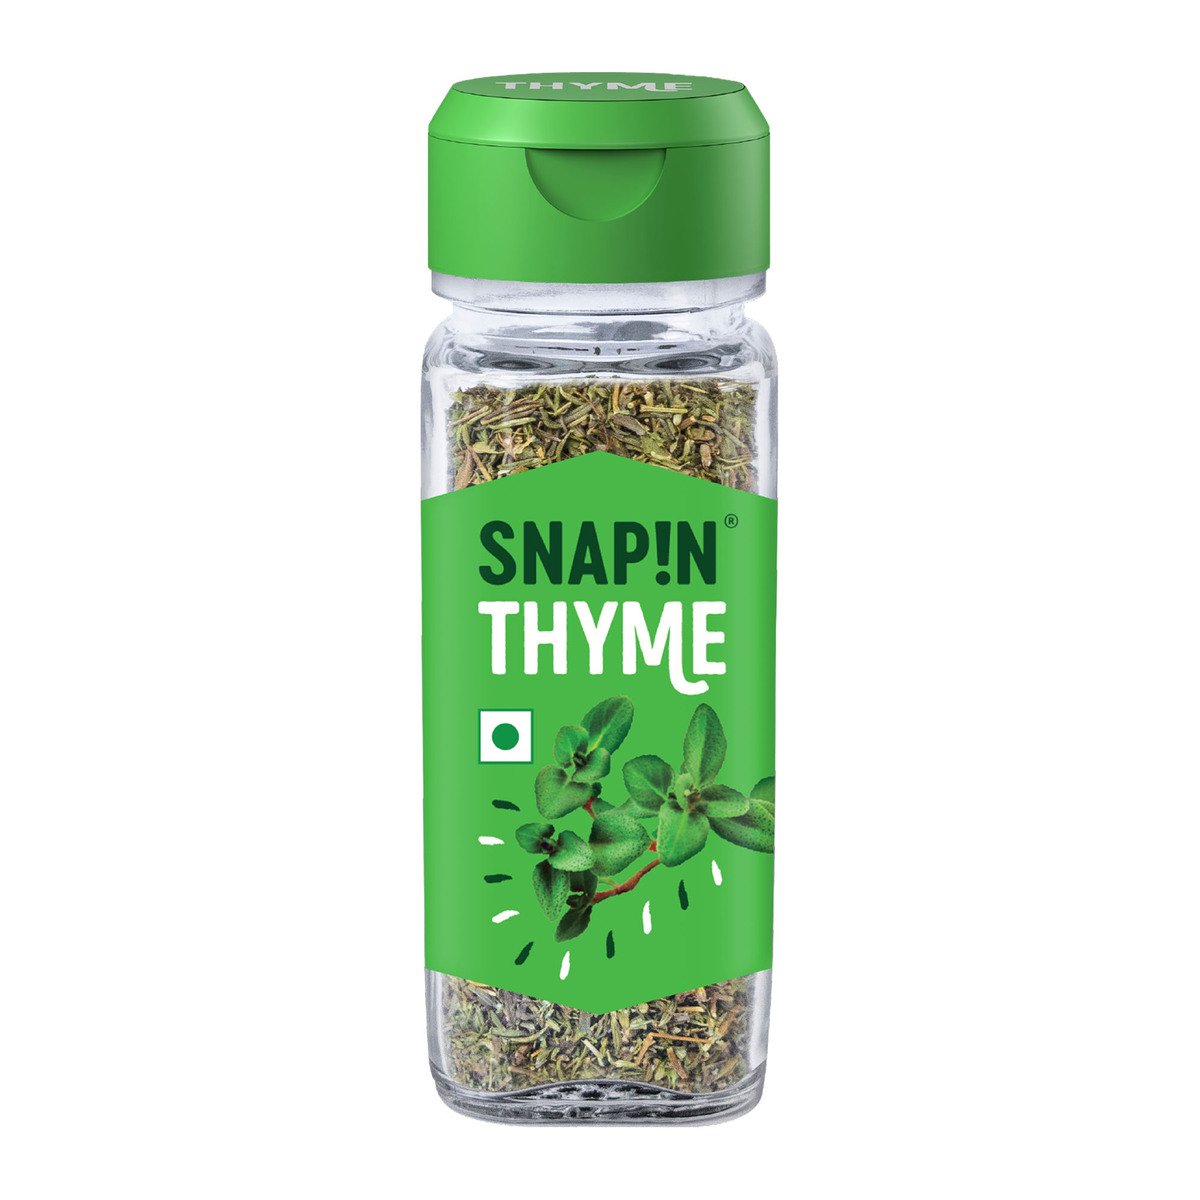 Snapin Thyme 6 g